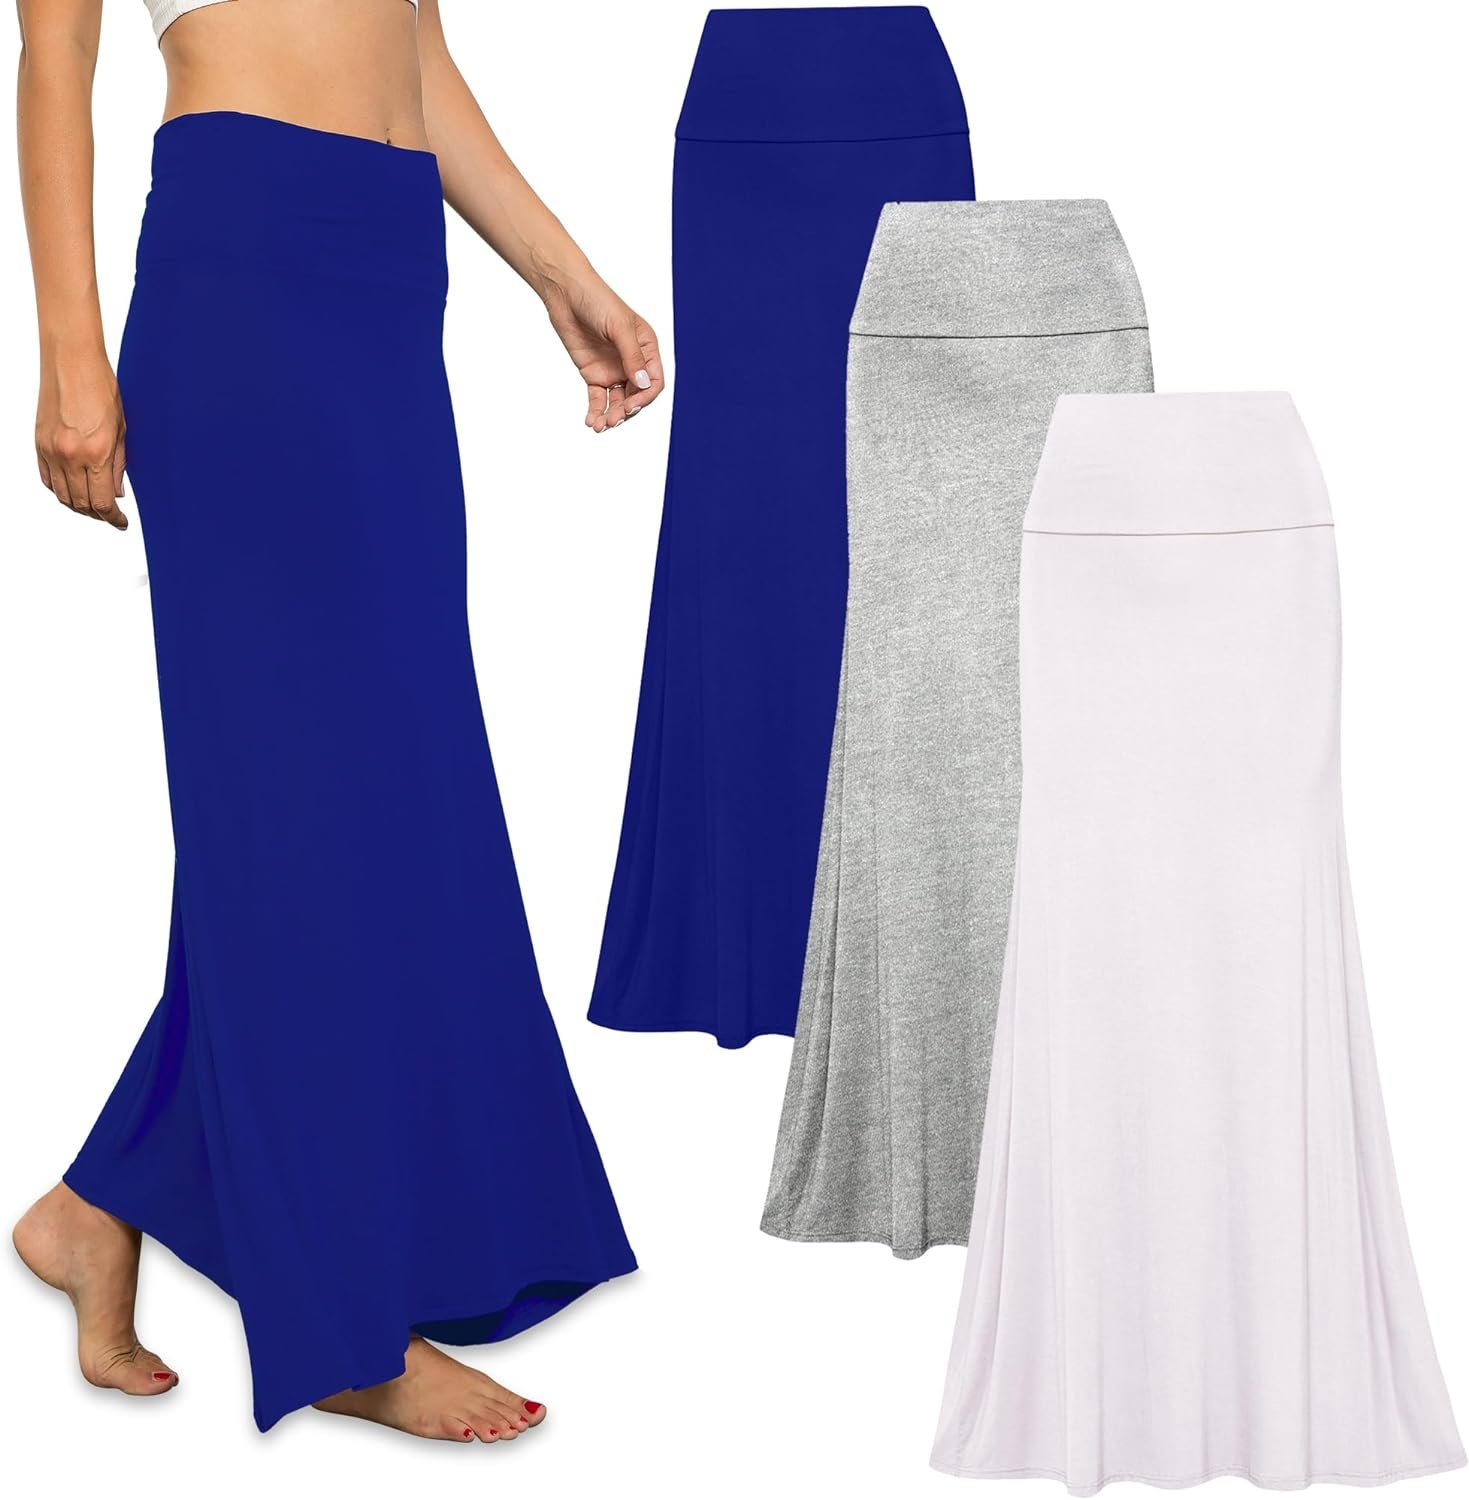 Free to Live 3 Pack Long Skirts for Women Fall Winter Flowy Maxi Skirt High Waist Fold Over Floor Ankle Length Jersey Knit